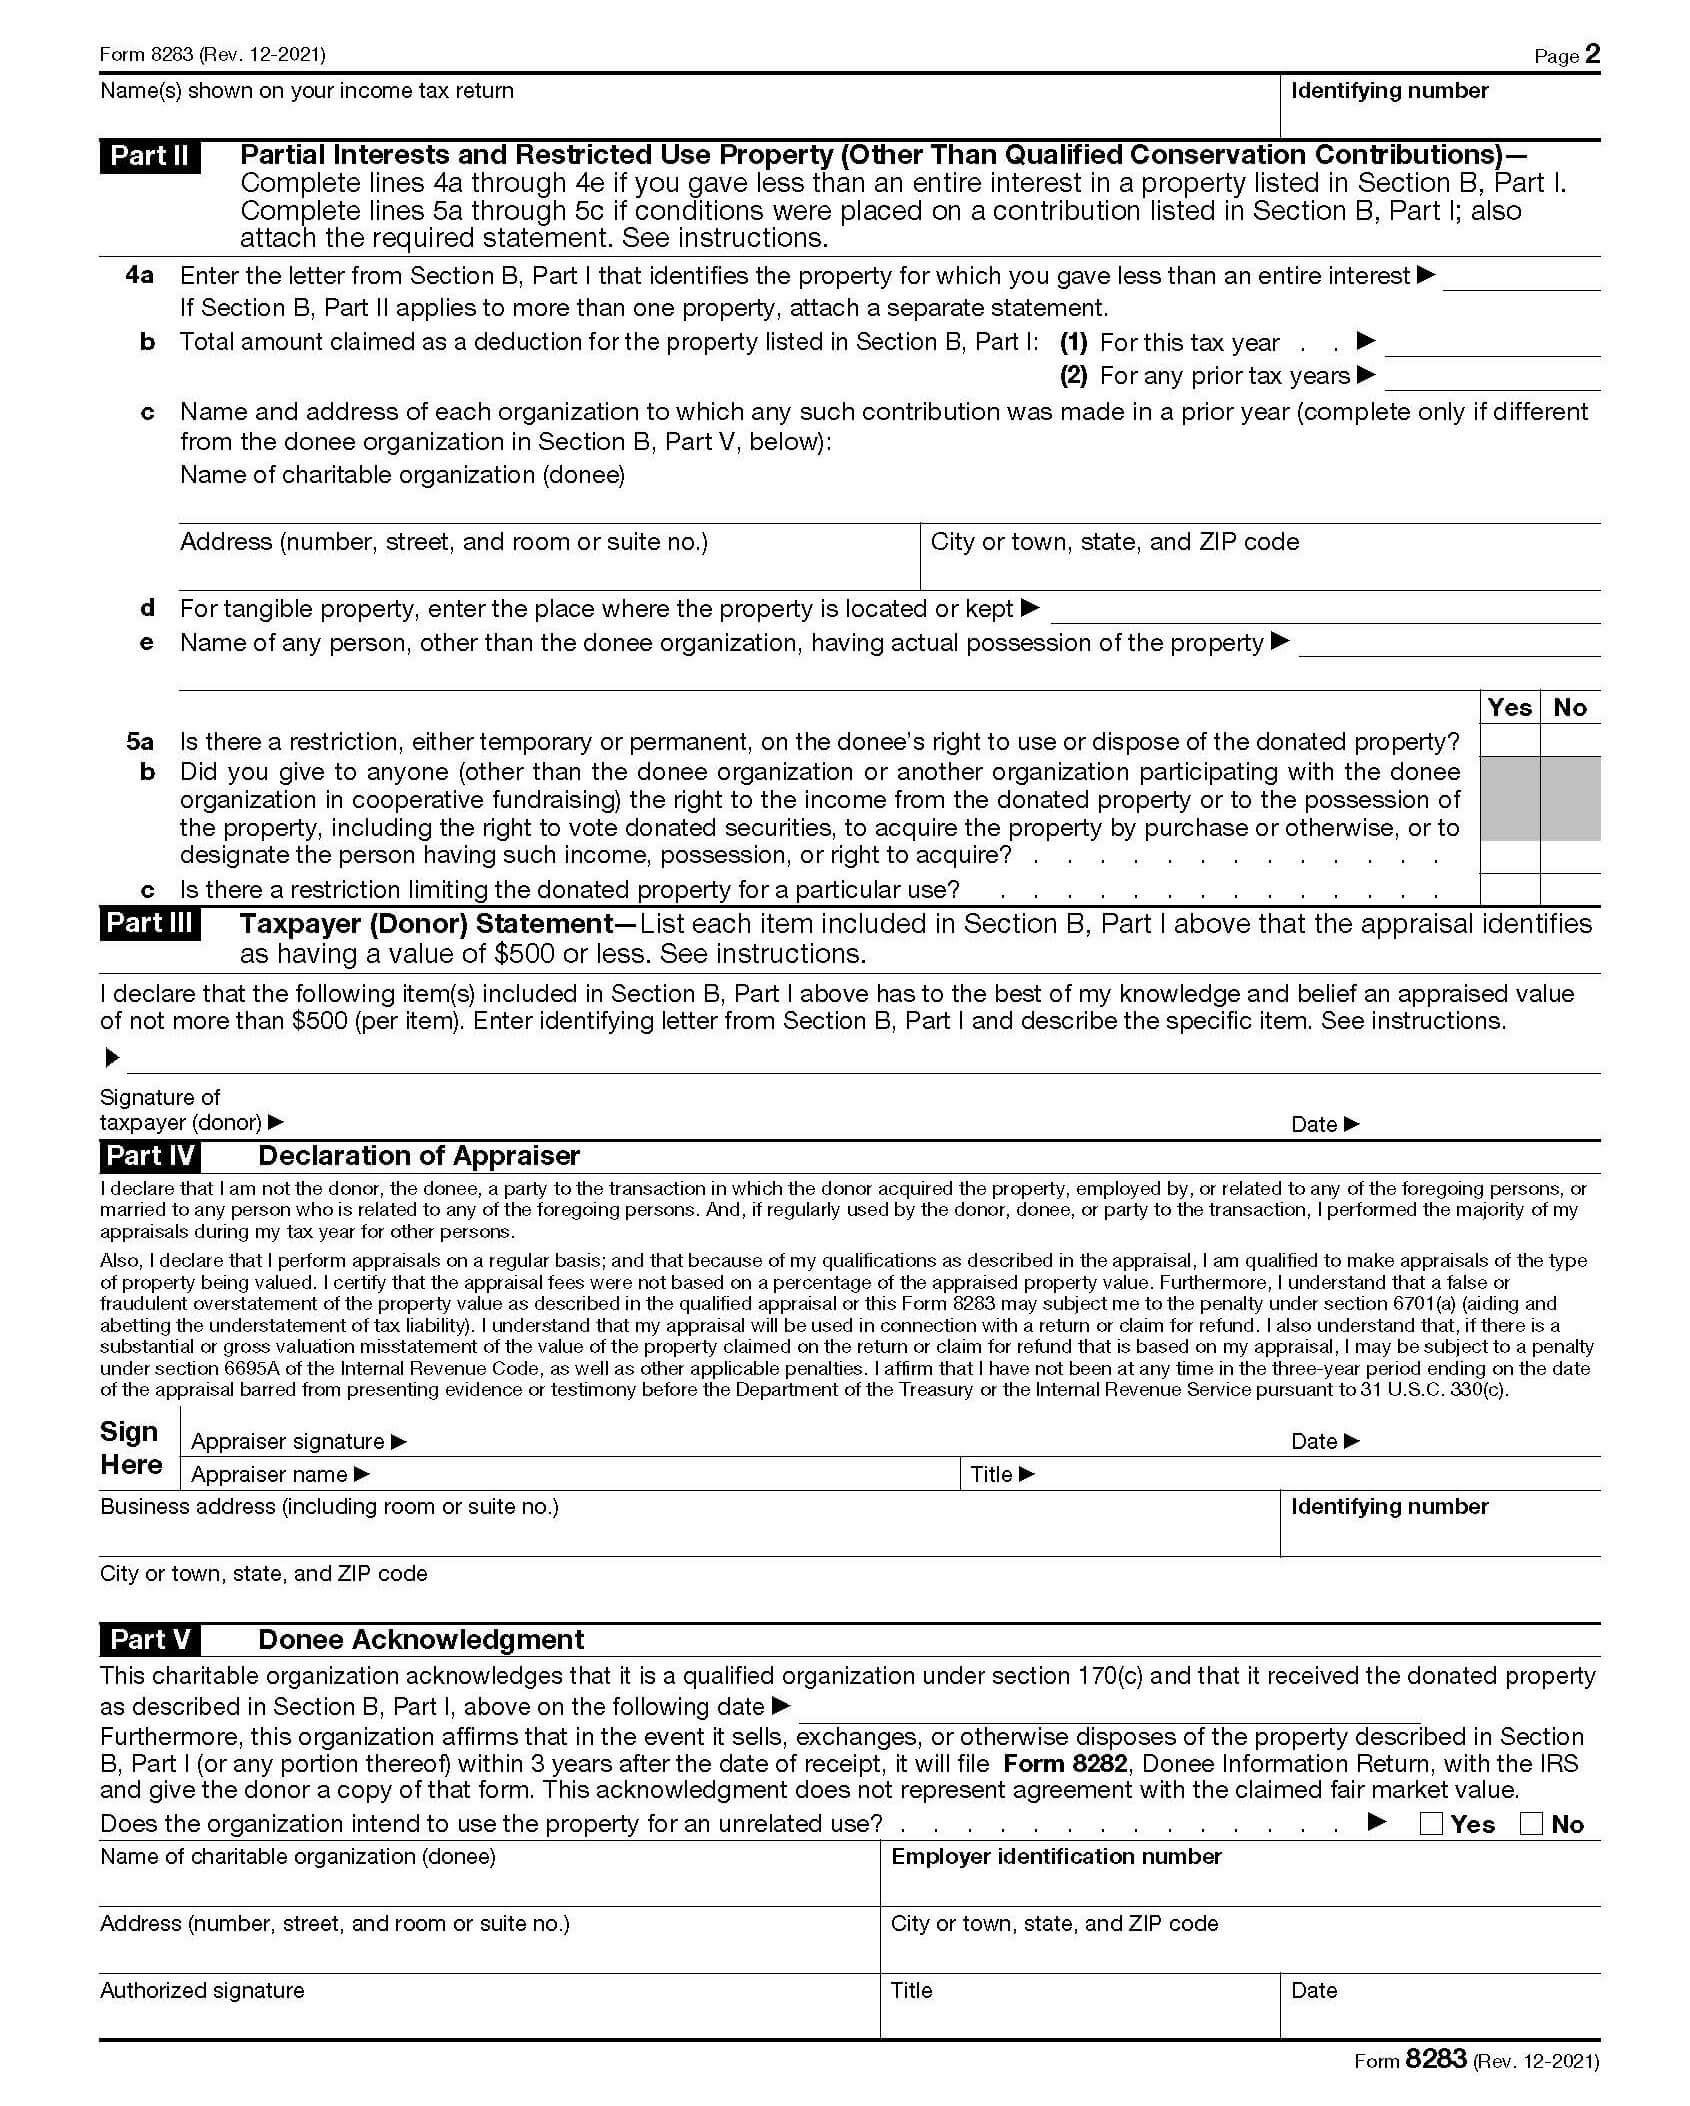 irs form 8283 section_b2 ejemplo